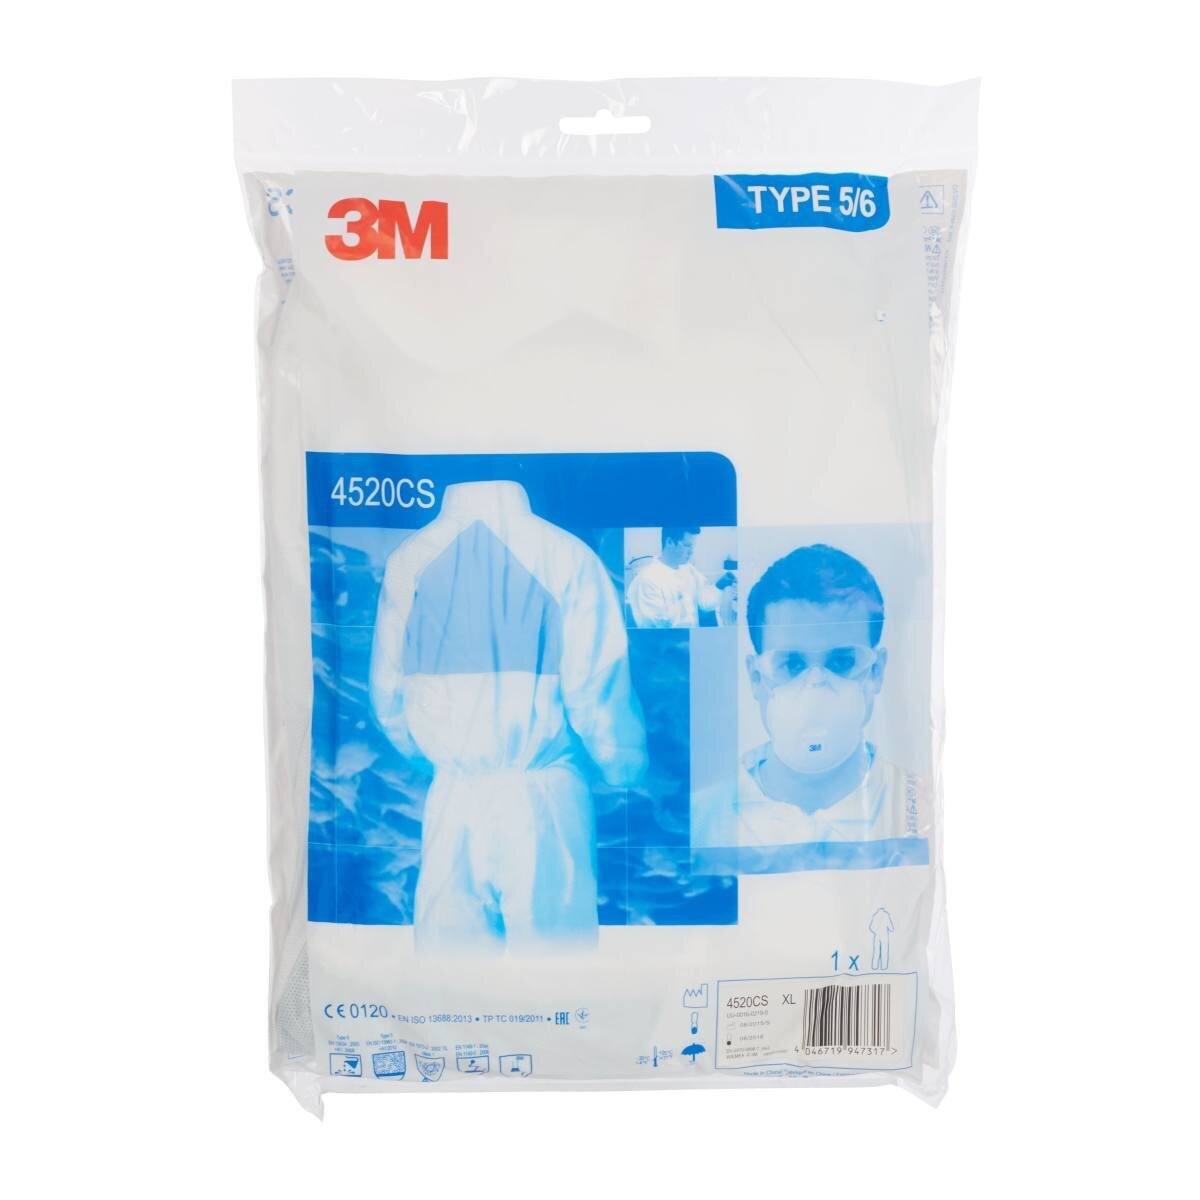 3M 4532 B coverall, blue, TYPE 5/6, size XL, material SSMMS low-linting, breathable, detachable zipper, knitted cuffs